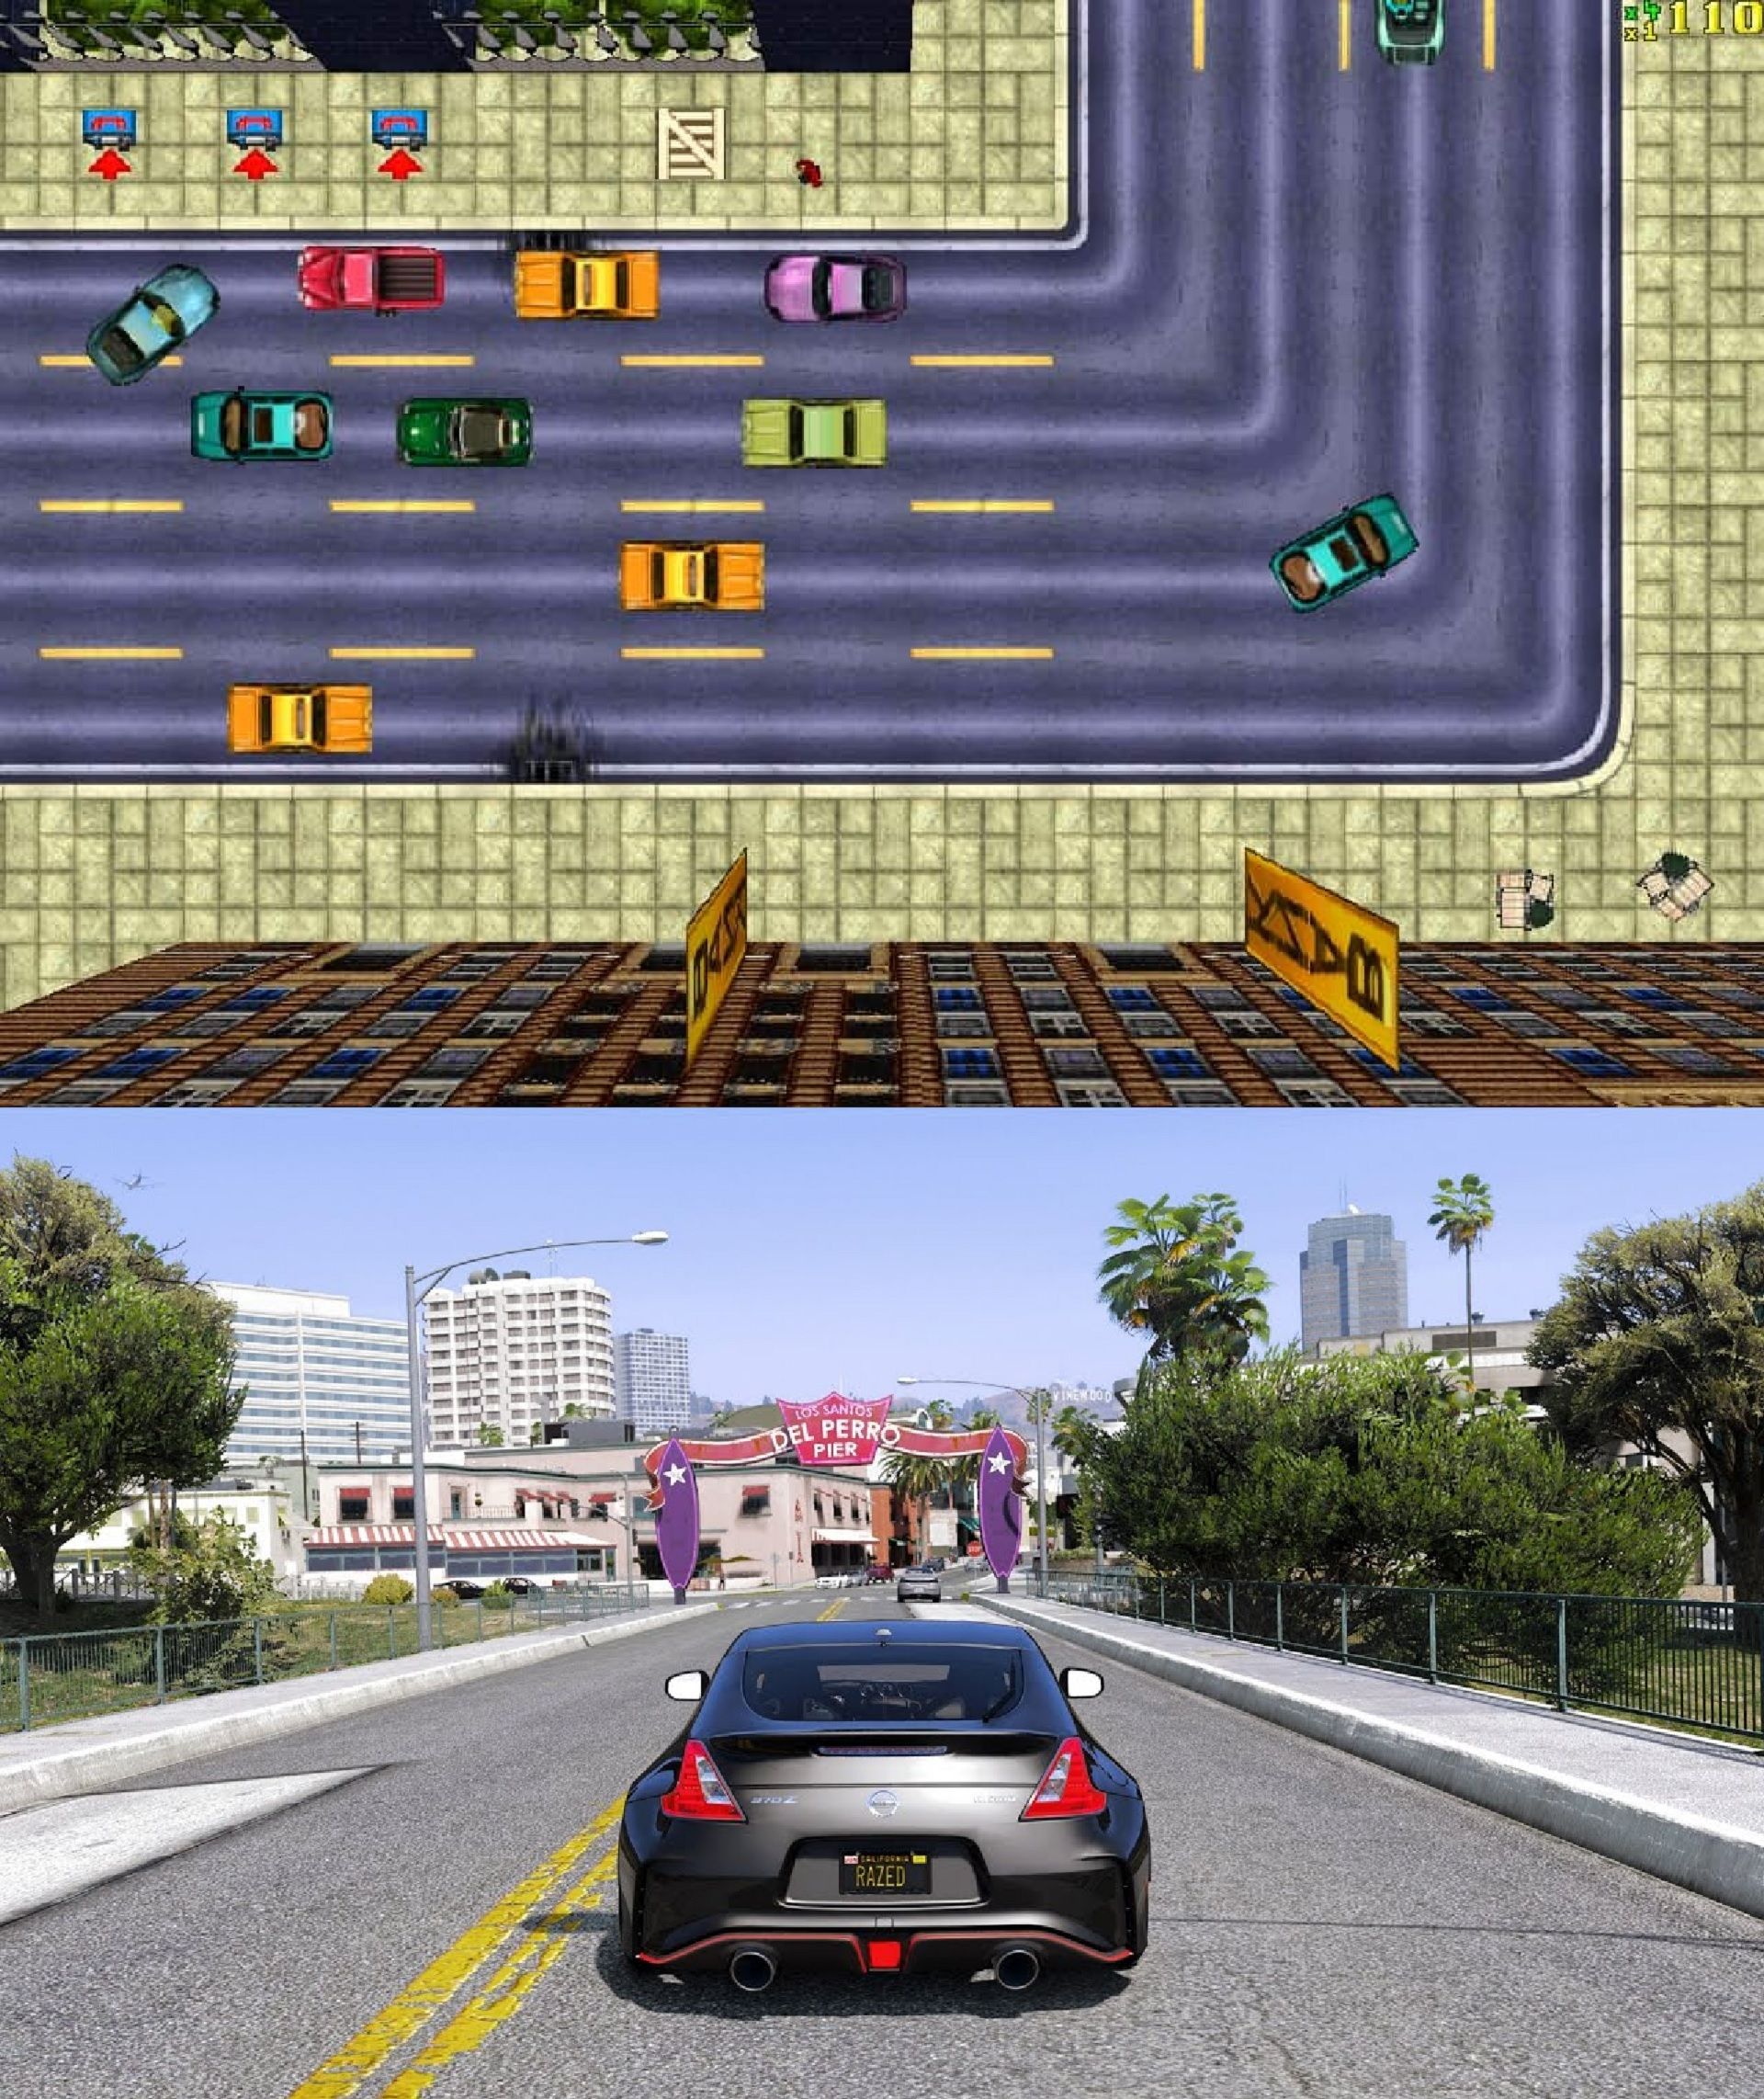 Then Vs Now Video Games Through The Decades image 5